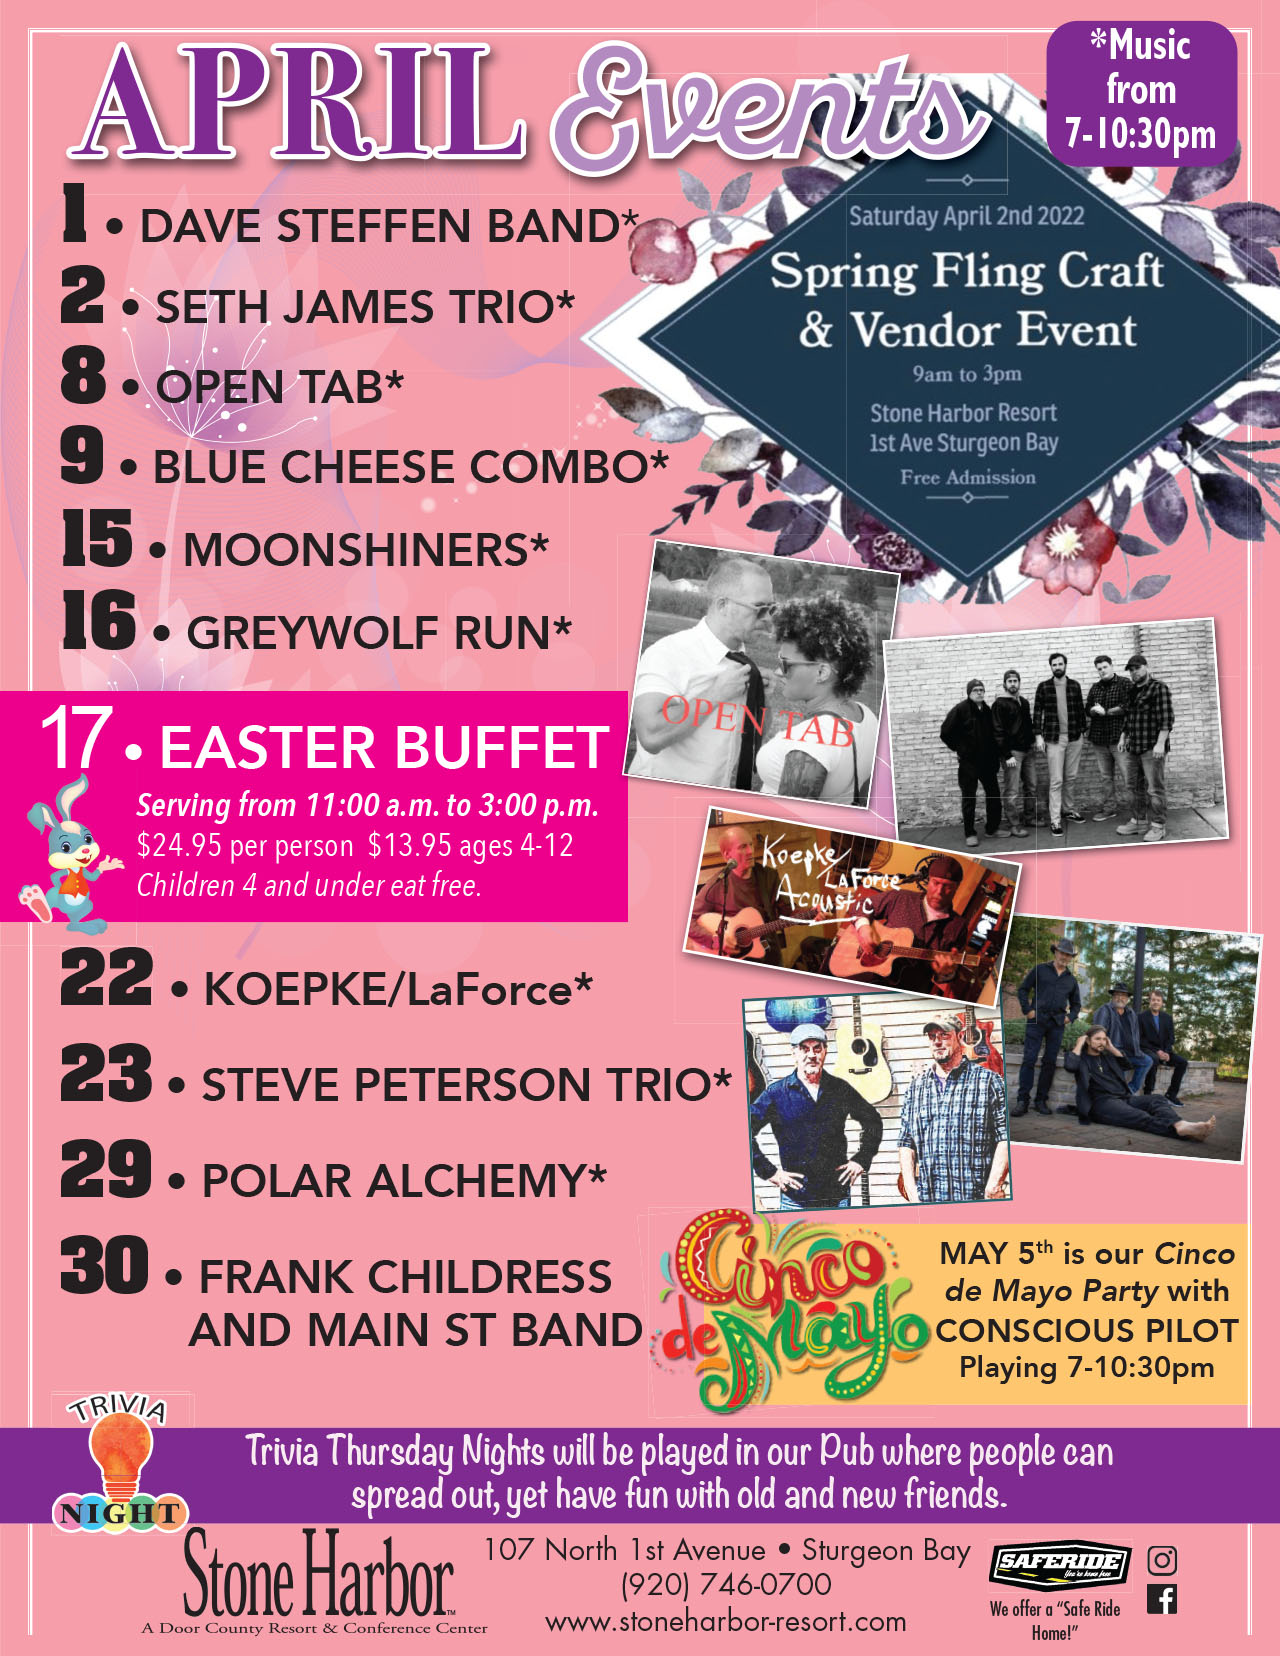 April events at Stone Harbor Resort, things to do in door county, door county entertainment, live bands, live music door county